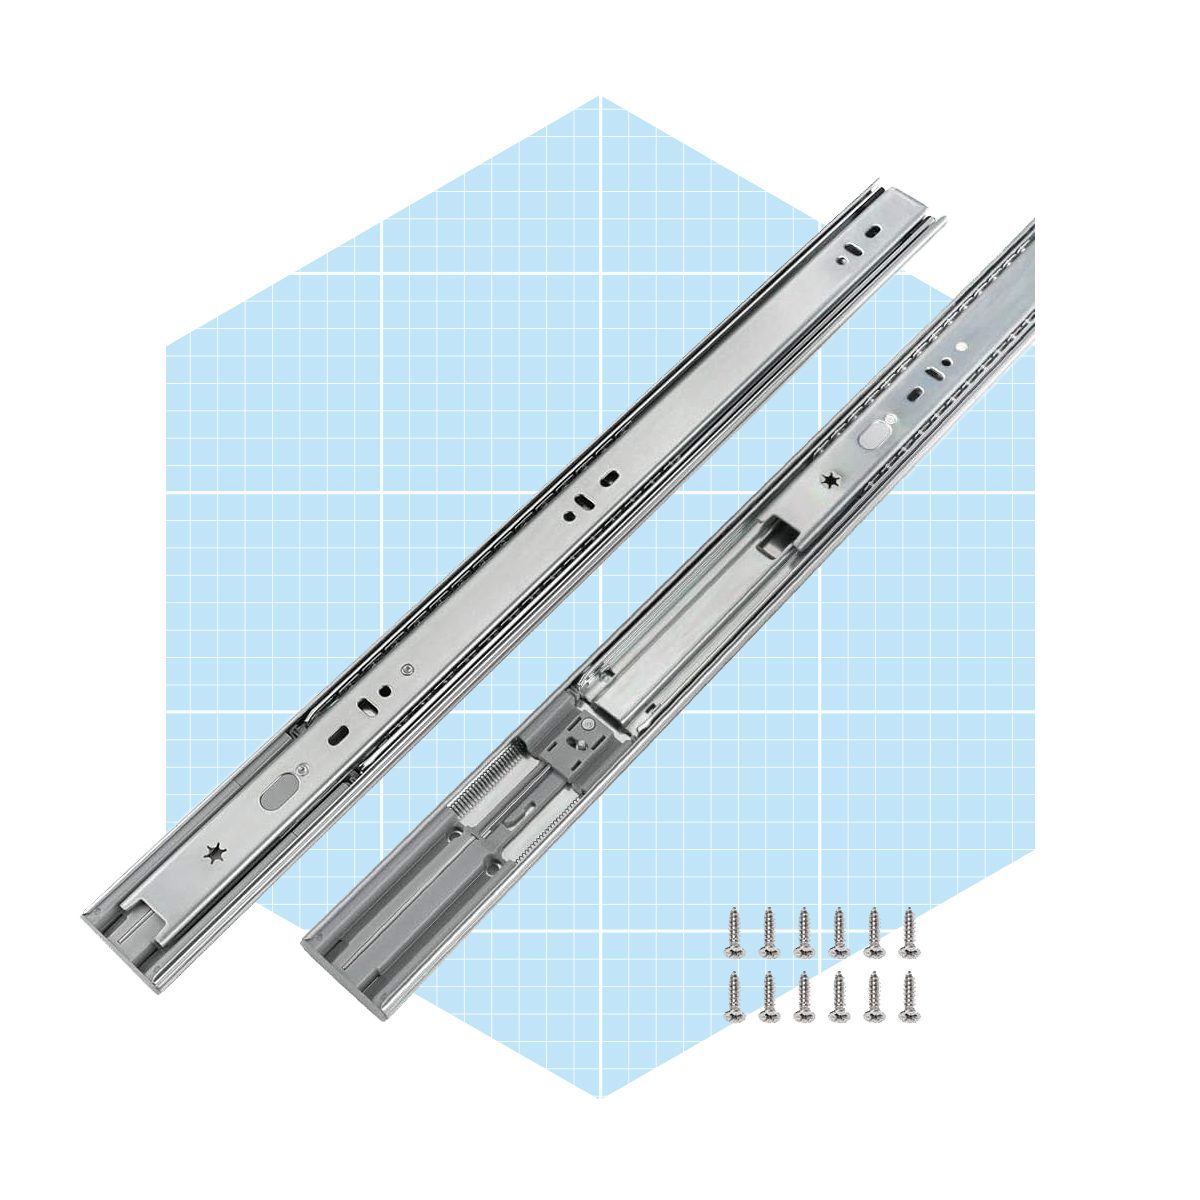 <h3>Lontan 4502S3-18 Soft Close Drawer Slides</h3> <p>Made from high-grade steel with a zinc-plated finish, the Lontan <a href="https://www.amazon.com/18in-Drawer-Slides-Mount-Close/dp/B07KWVQ4G2" rel="noopener">4502S3-18 Soft Close Drawer Slides</a> come in 10 pairs for <a href="https://www.familyhandyman.com/project/kitchen-storage-cabinet-rollouts/" rel="noopener noreferrer">multiple kitchen drawer installations</a>. Individually wrapped slides protect them during shipment to ensure a smooth delivery. Because they are designed with nylon detachable snaps, they make for easy-on, easy-off assembly. Amazon reviewer <a href="https://www.amazon.com/gp/customer-reviews/R2LGJJ2R5SULNT" rel="noopener">Online Junkie</a> says the slides are ideal for smaller jobs.</p> <h3>Pros:</h3> <ul> <li>Includes 10 pairs of drawer slides</li> <li>Sufficient supplies for small or large jobs</li> <li>Comes in six sizes</li> </ul> <h3>Cons:</h3> <ul> <li>Screws may strip easily</li> </ul> <p class="listicle-page__cta-button-shop"><a class="shop-btn" href="https://www.amazon.com/18in-Drawer-Slides-Mount-Close/dp/B07KWVQ4G2">Shop Now</a></p>